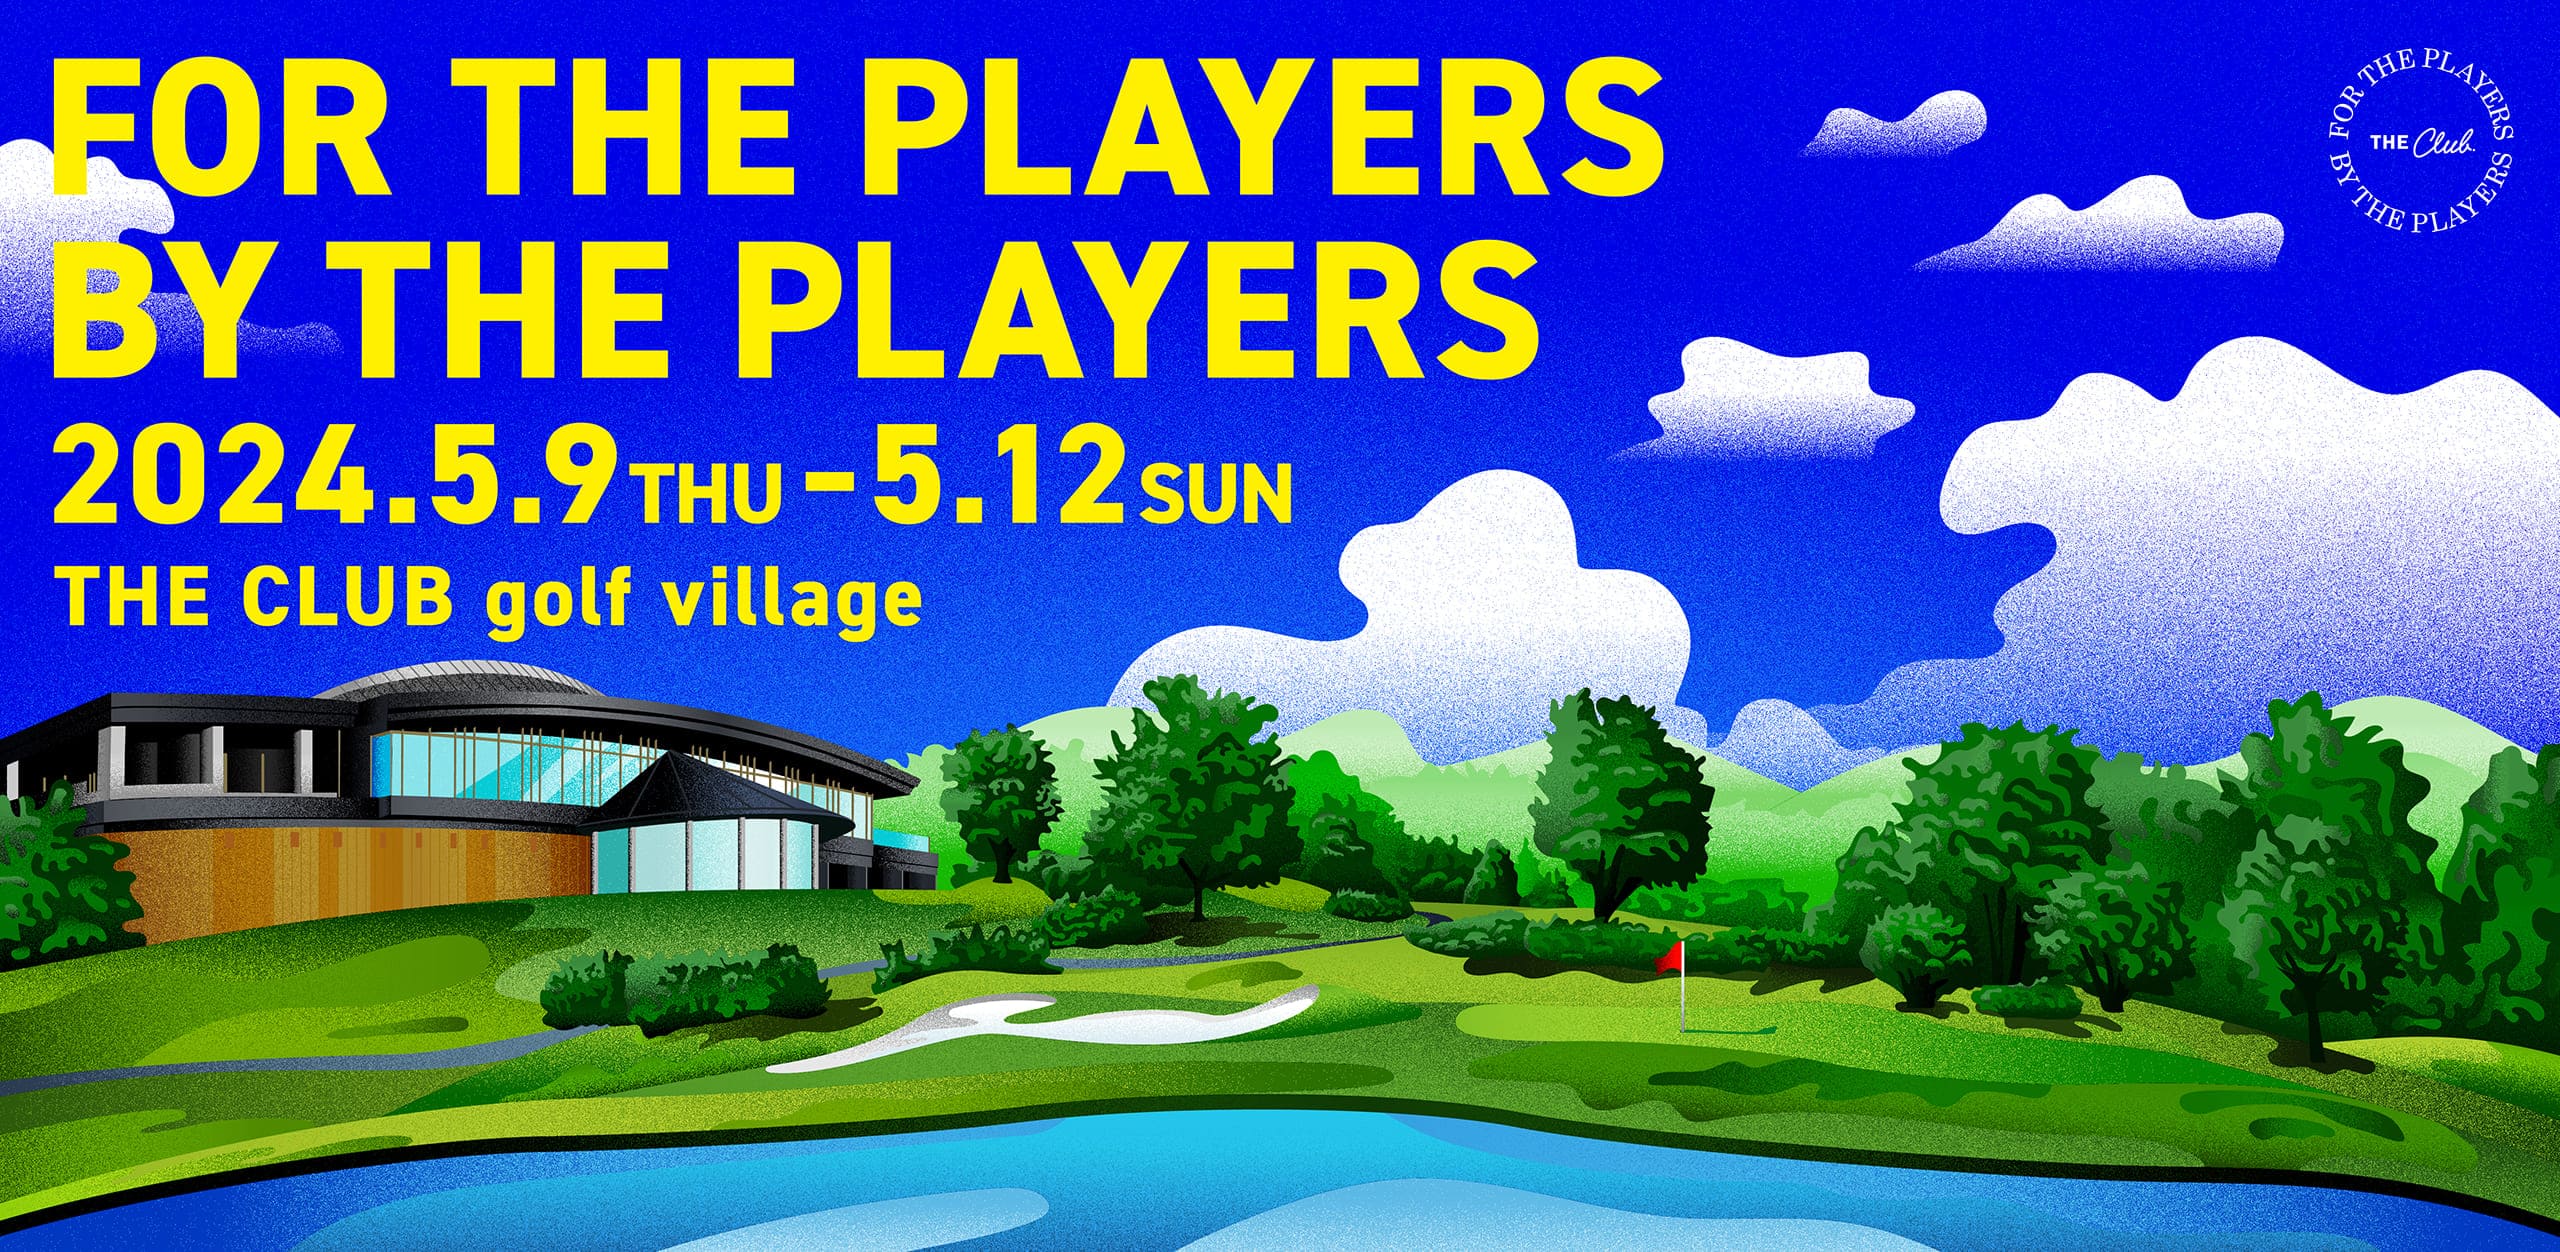 「For The Players By The Players」大会ボランティア募集のお知らせ